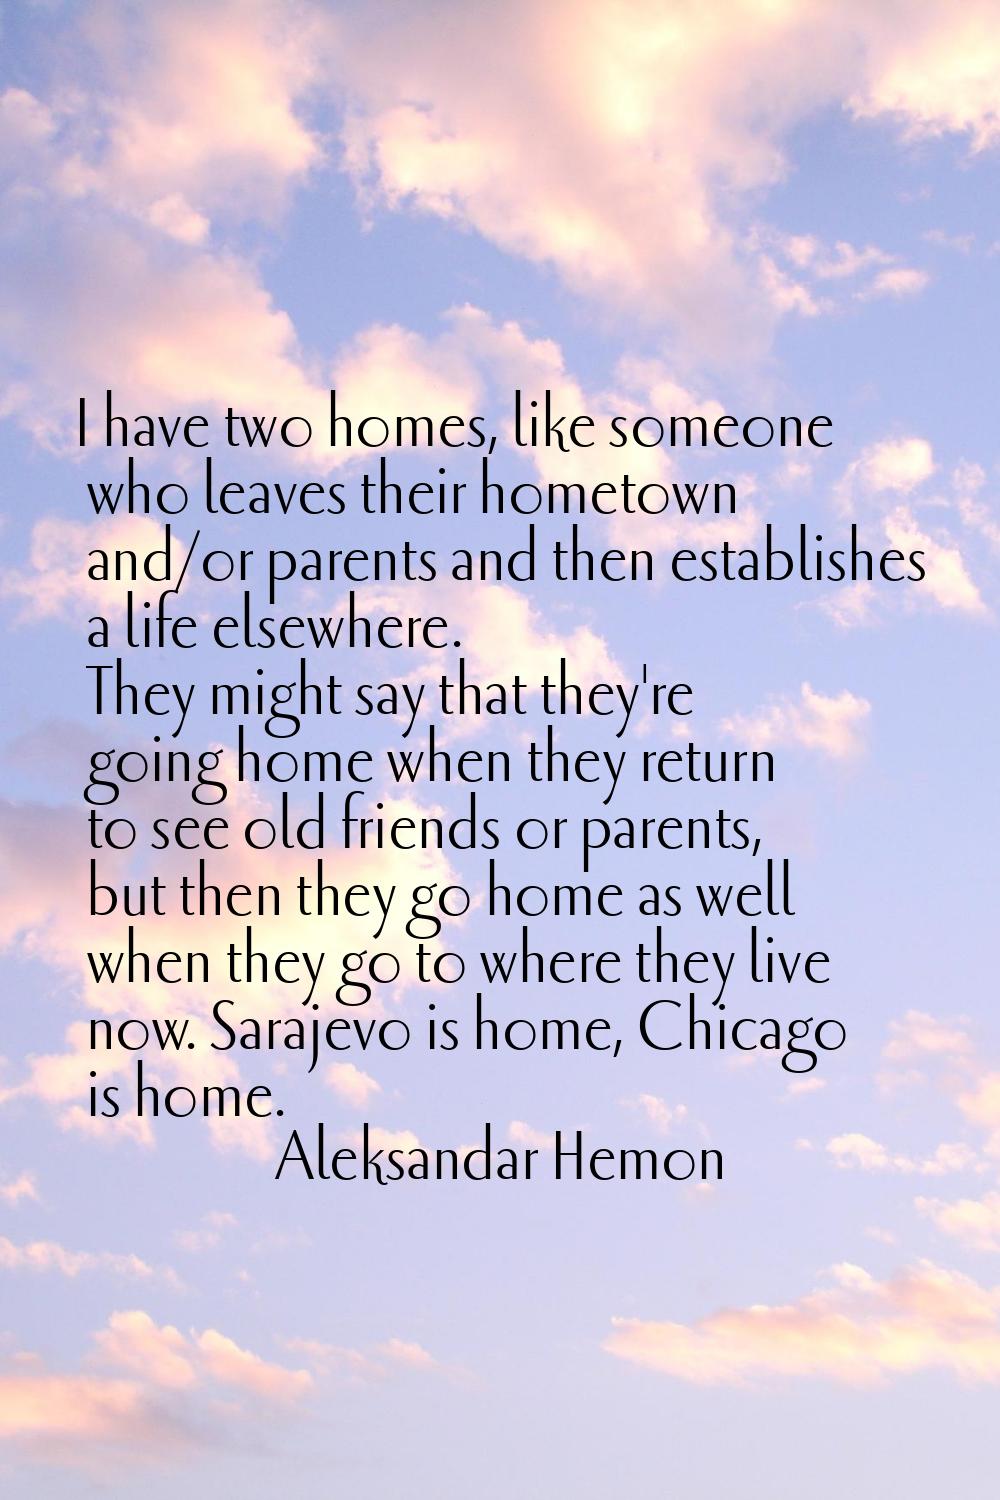 I have two homes, like someone who leaves their hometown and/or parents and then establishes a life